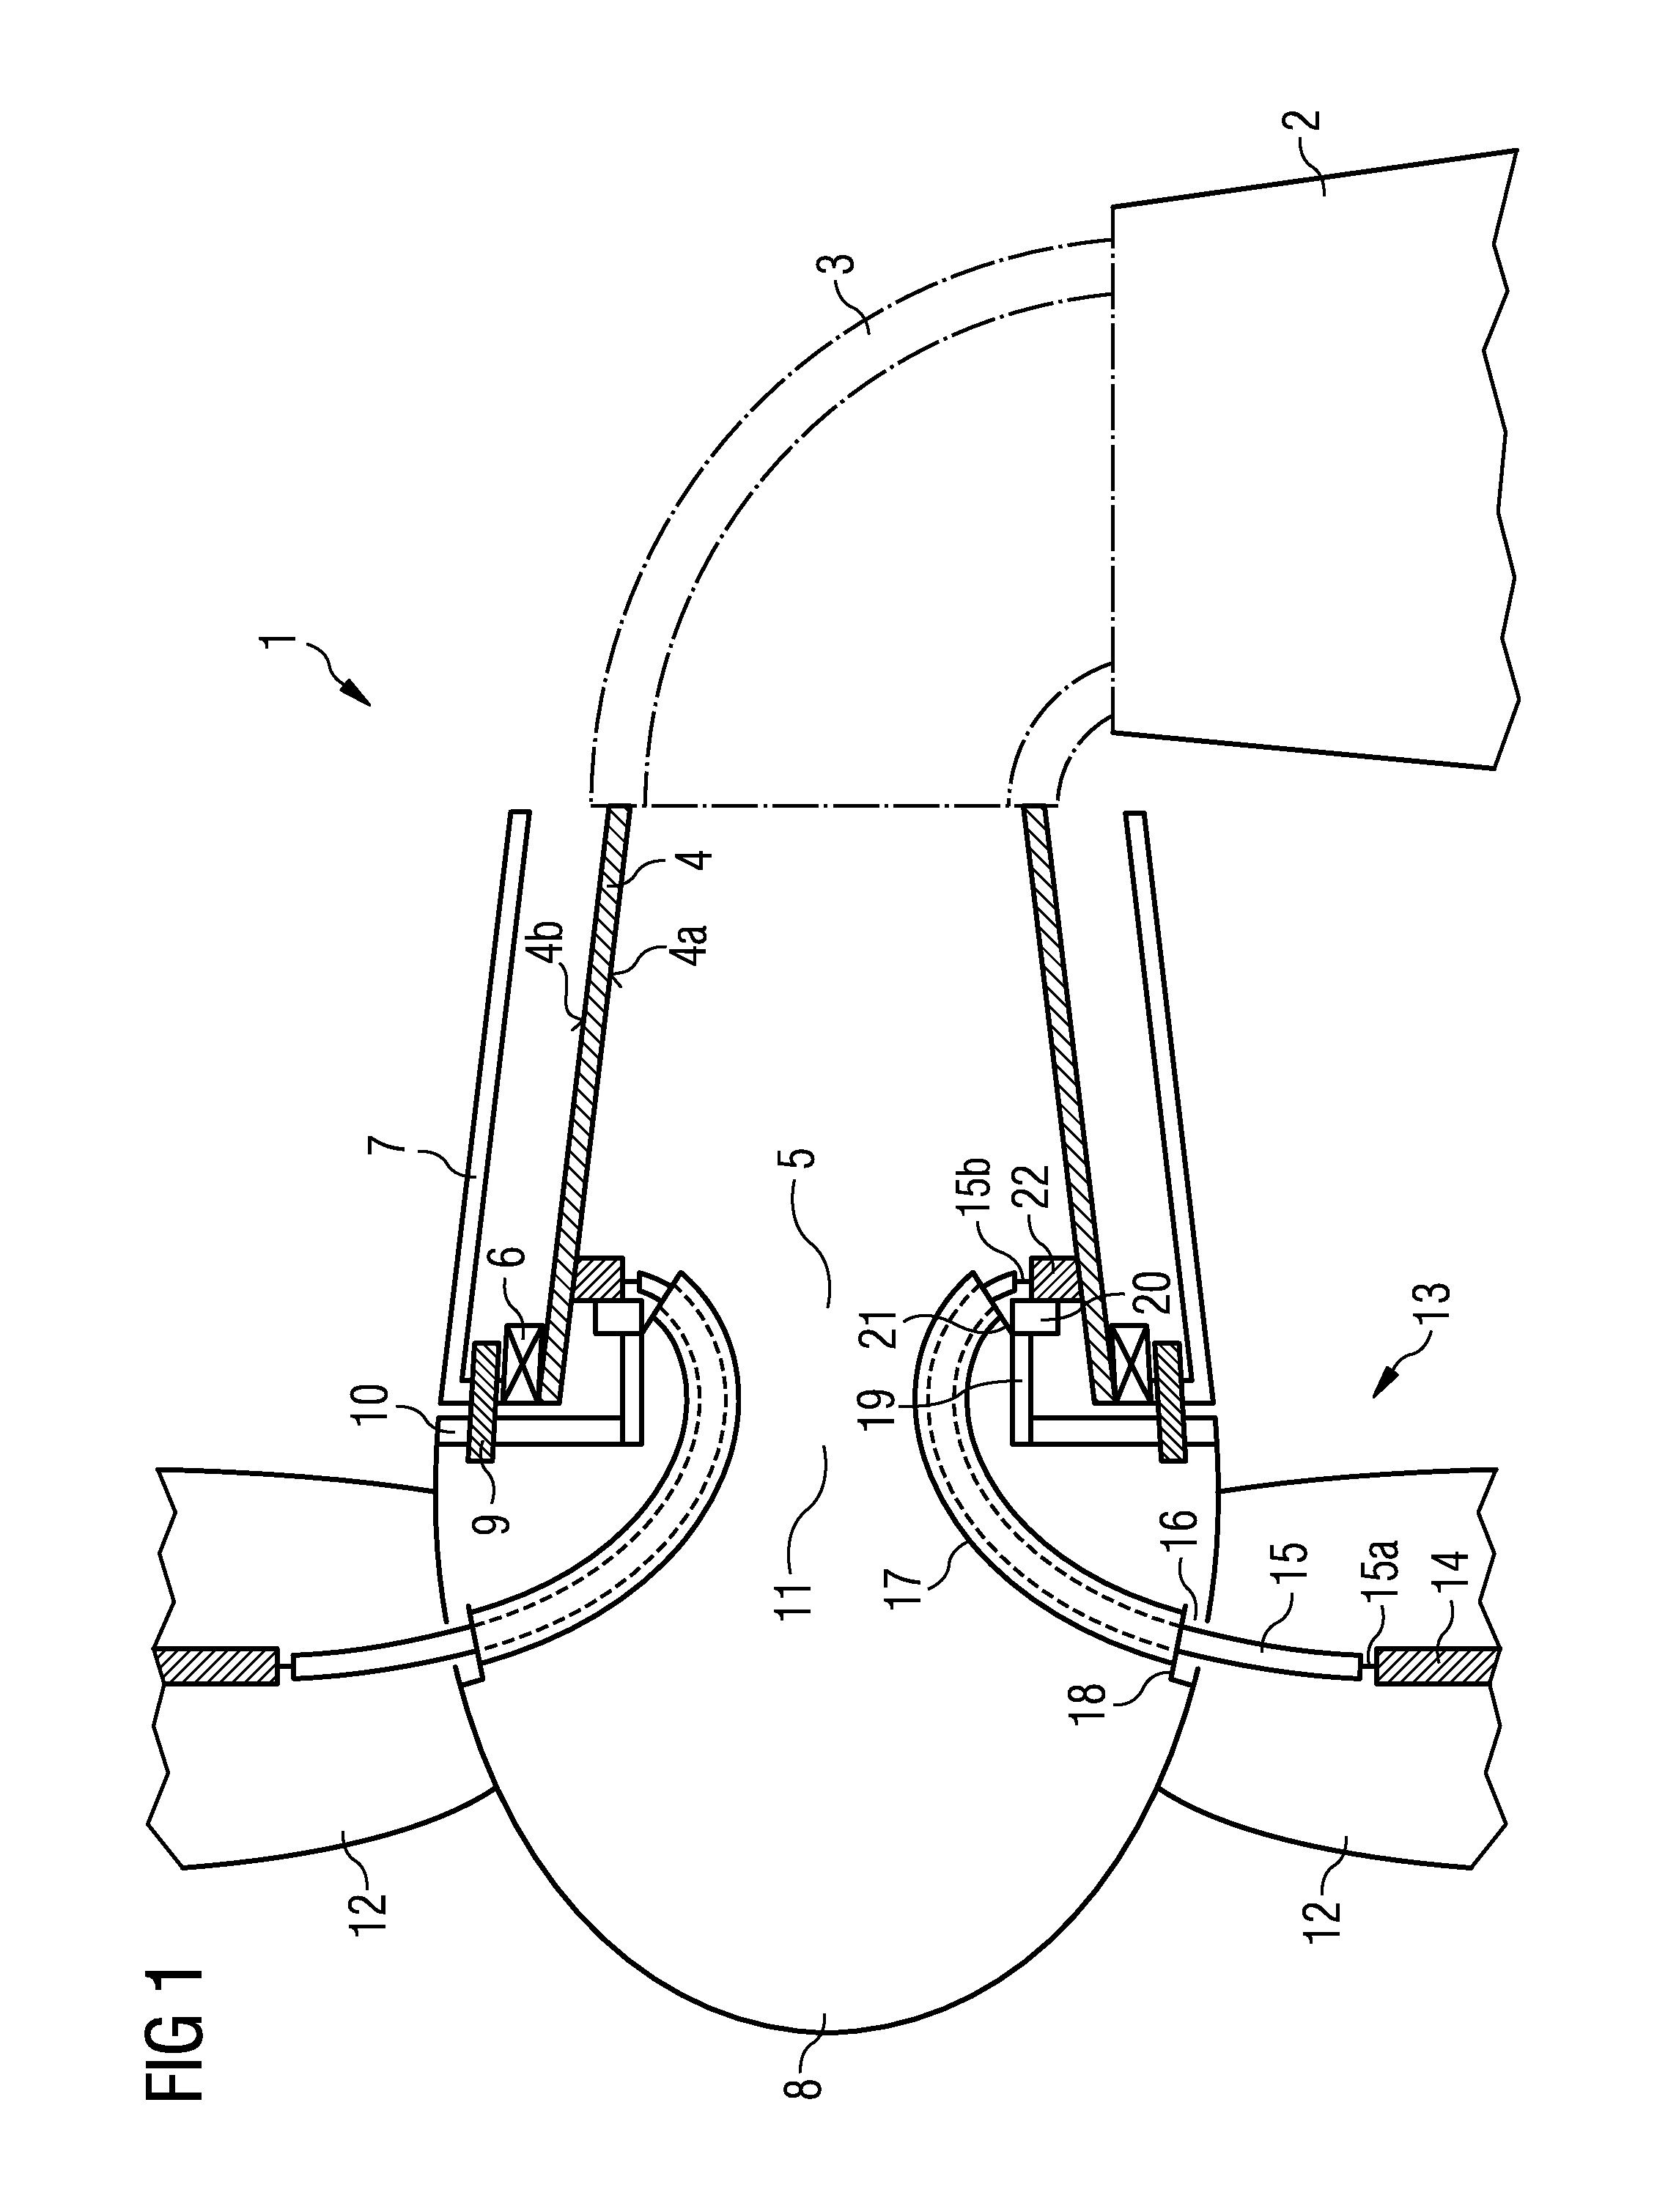 Lightning protection system for a wind turbine and wind turbine with a lightning protection system